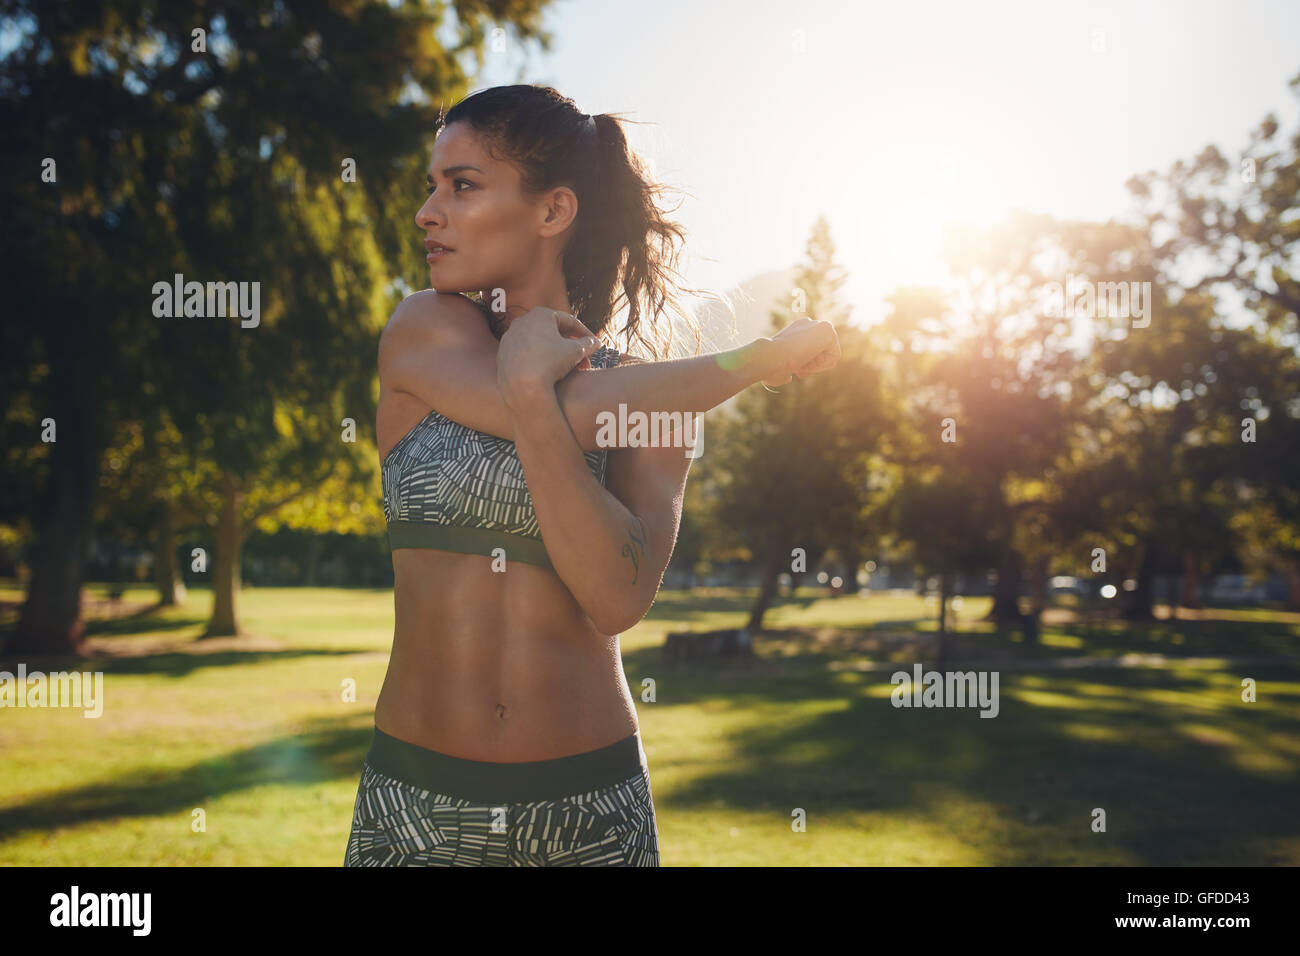 Young female athlete stretching before fitness training session at the park. Healthy young woman warming up outdoors. She is str Stock Photo